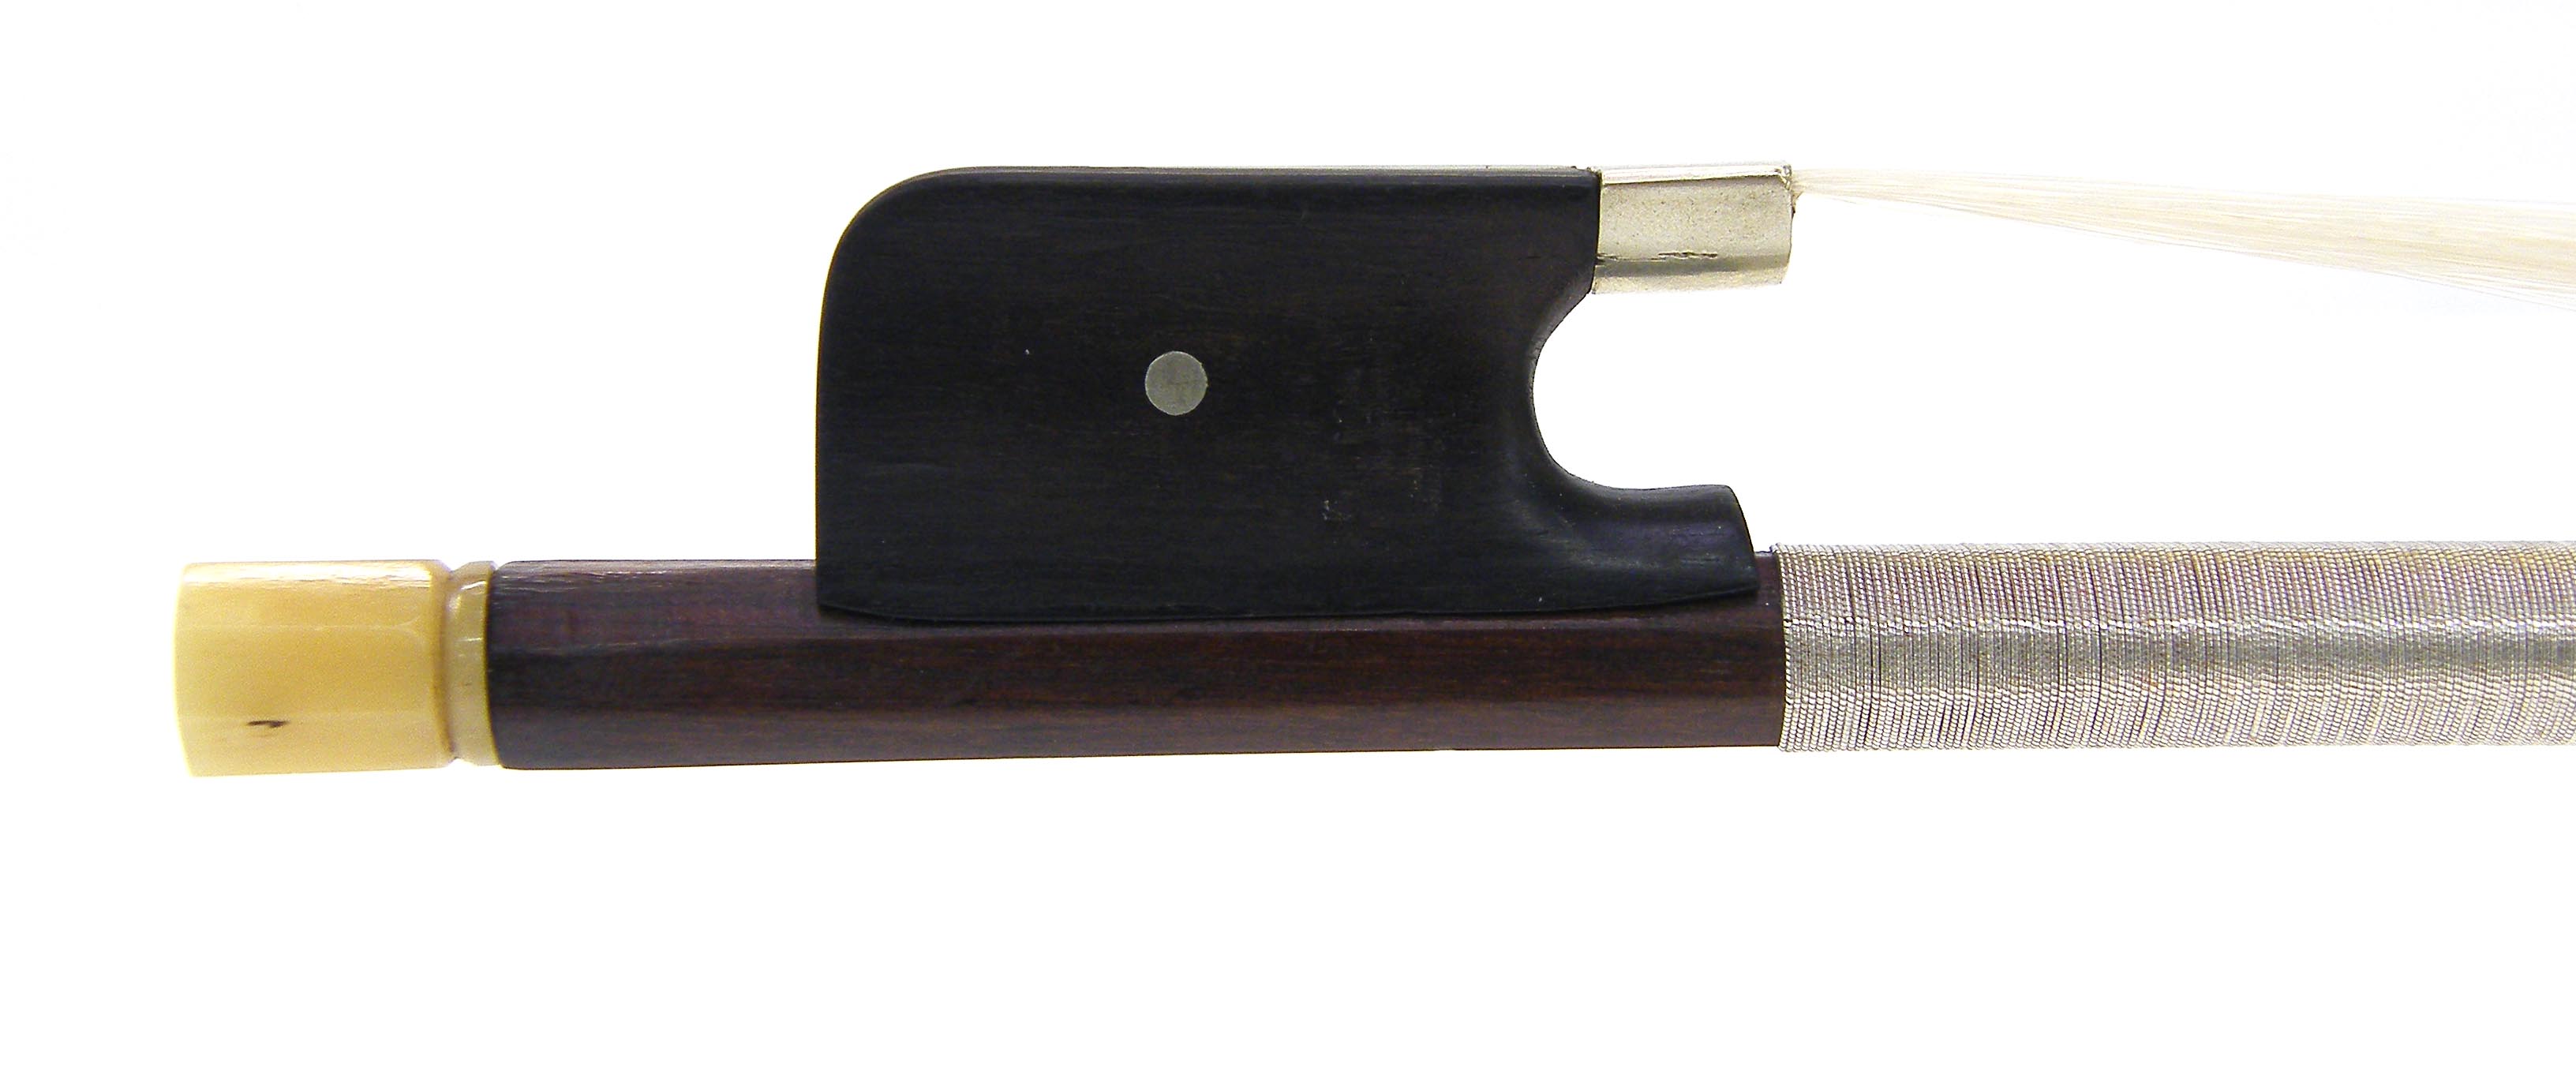 19th century silver and bone mounted violoncello bow of the Knopf school, unstamped, the stick